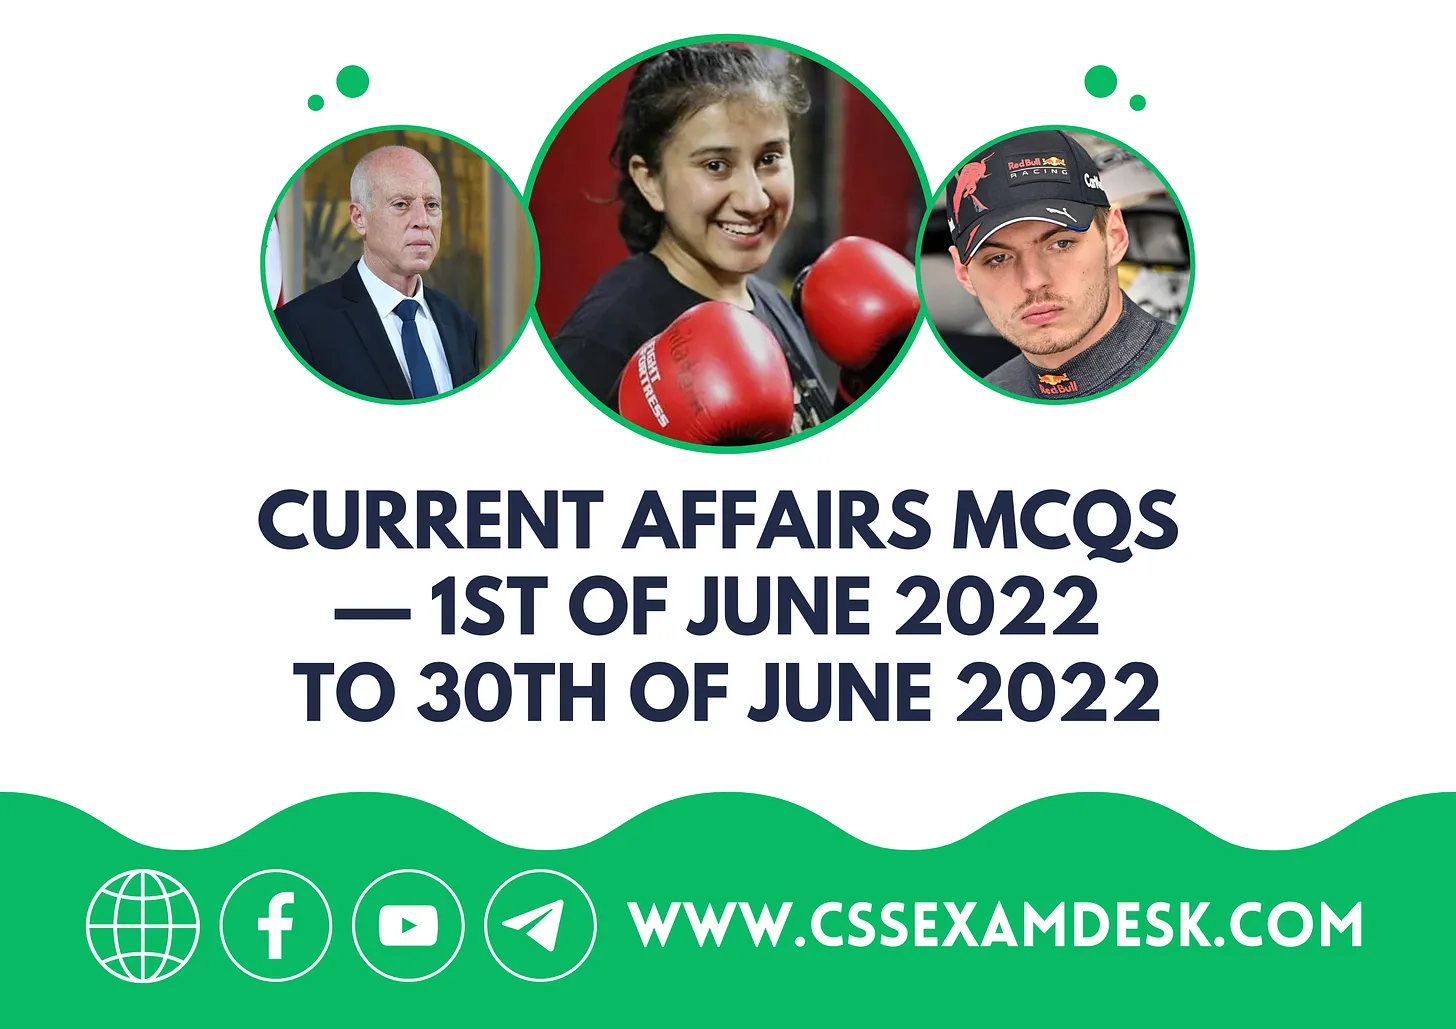 Current Affairs MCQs — 1st of June 2022 to 30th of June 2022